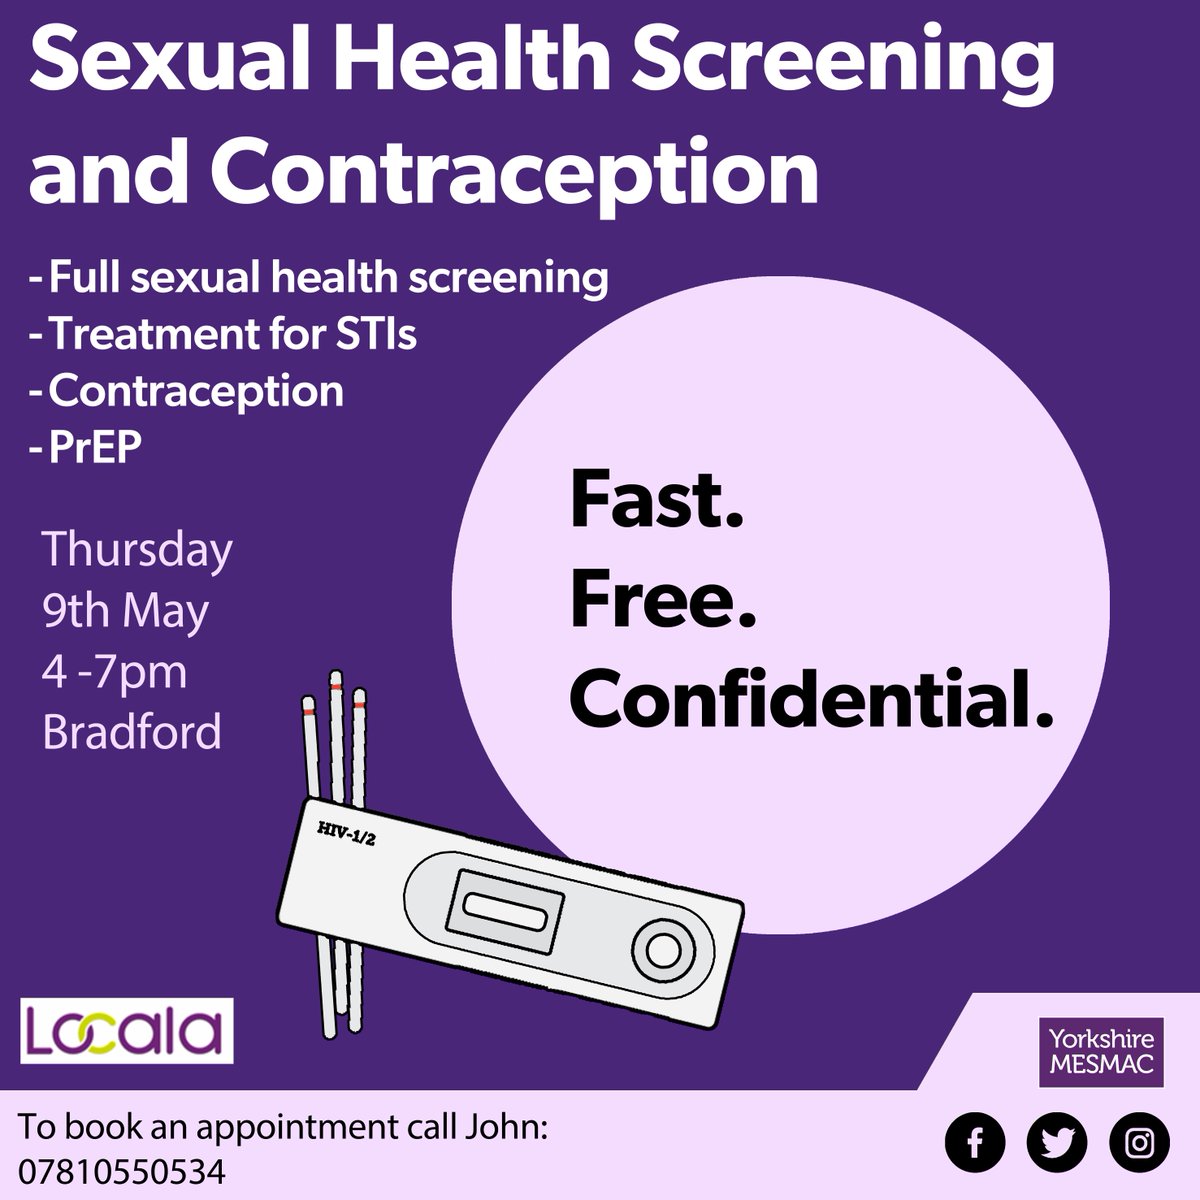 Think you’ve been at risk and need a full sexual health screening? Did you know we run a monthly clinic with @locala_safesex Get tested for Gonorrhoea, Chlamydia, HIV and Syphilis! Call John to book an appointment: 📞 07810 550 534 #sexualhealth #lgbtq #PrEP #contraception